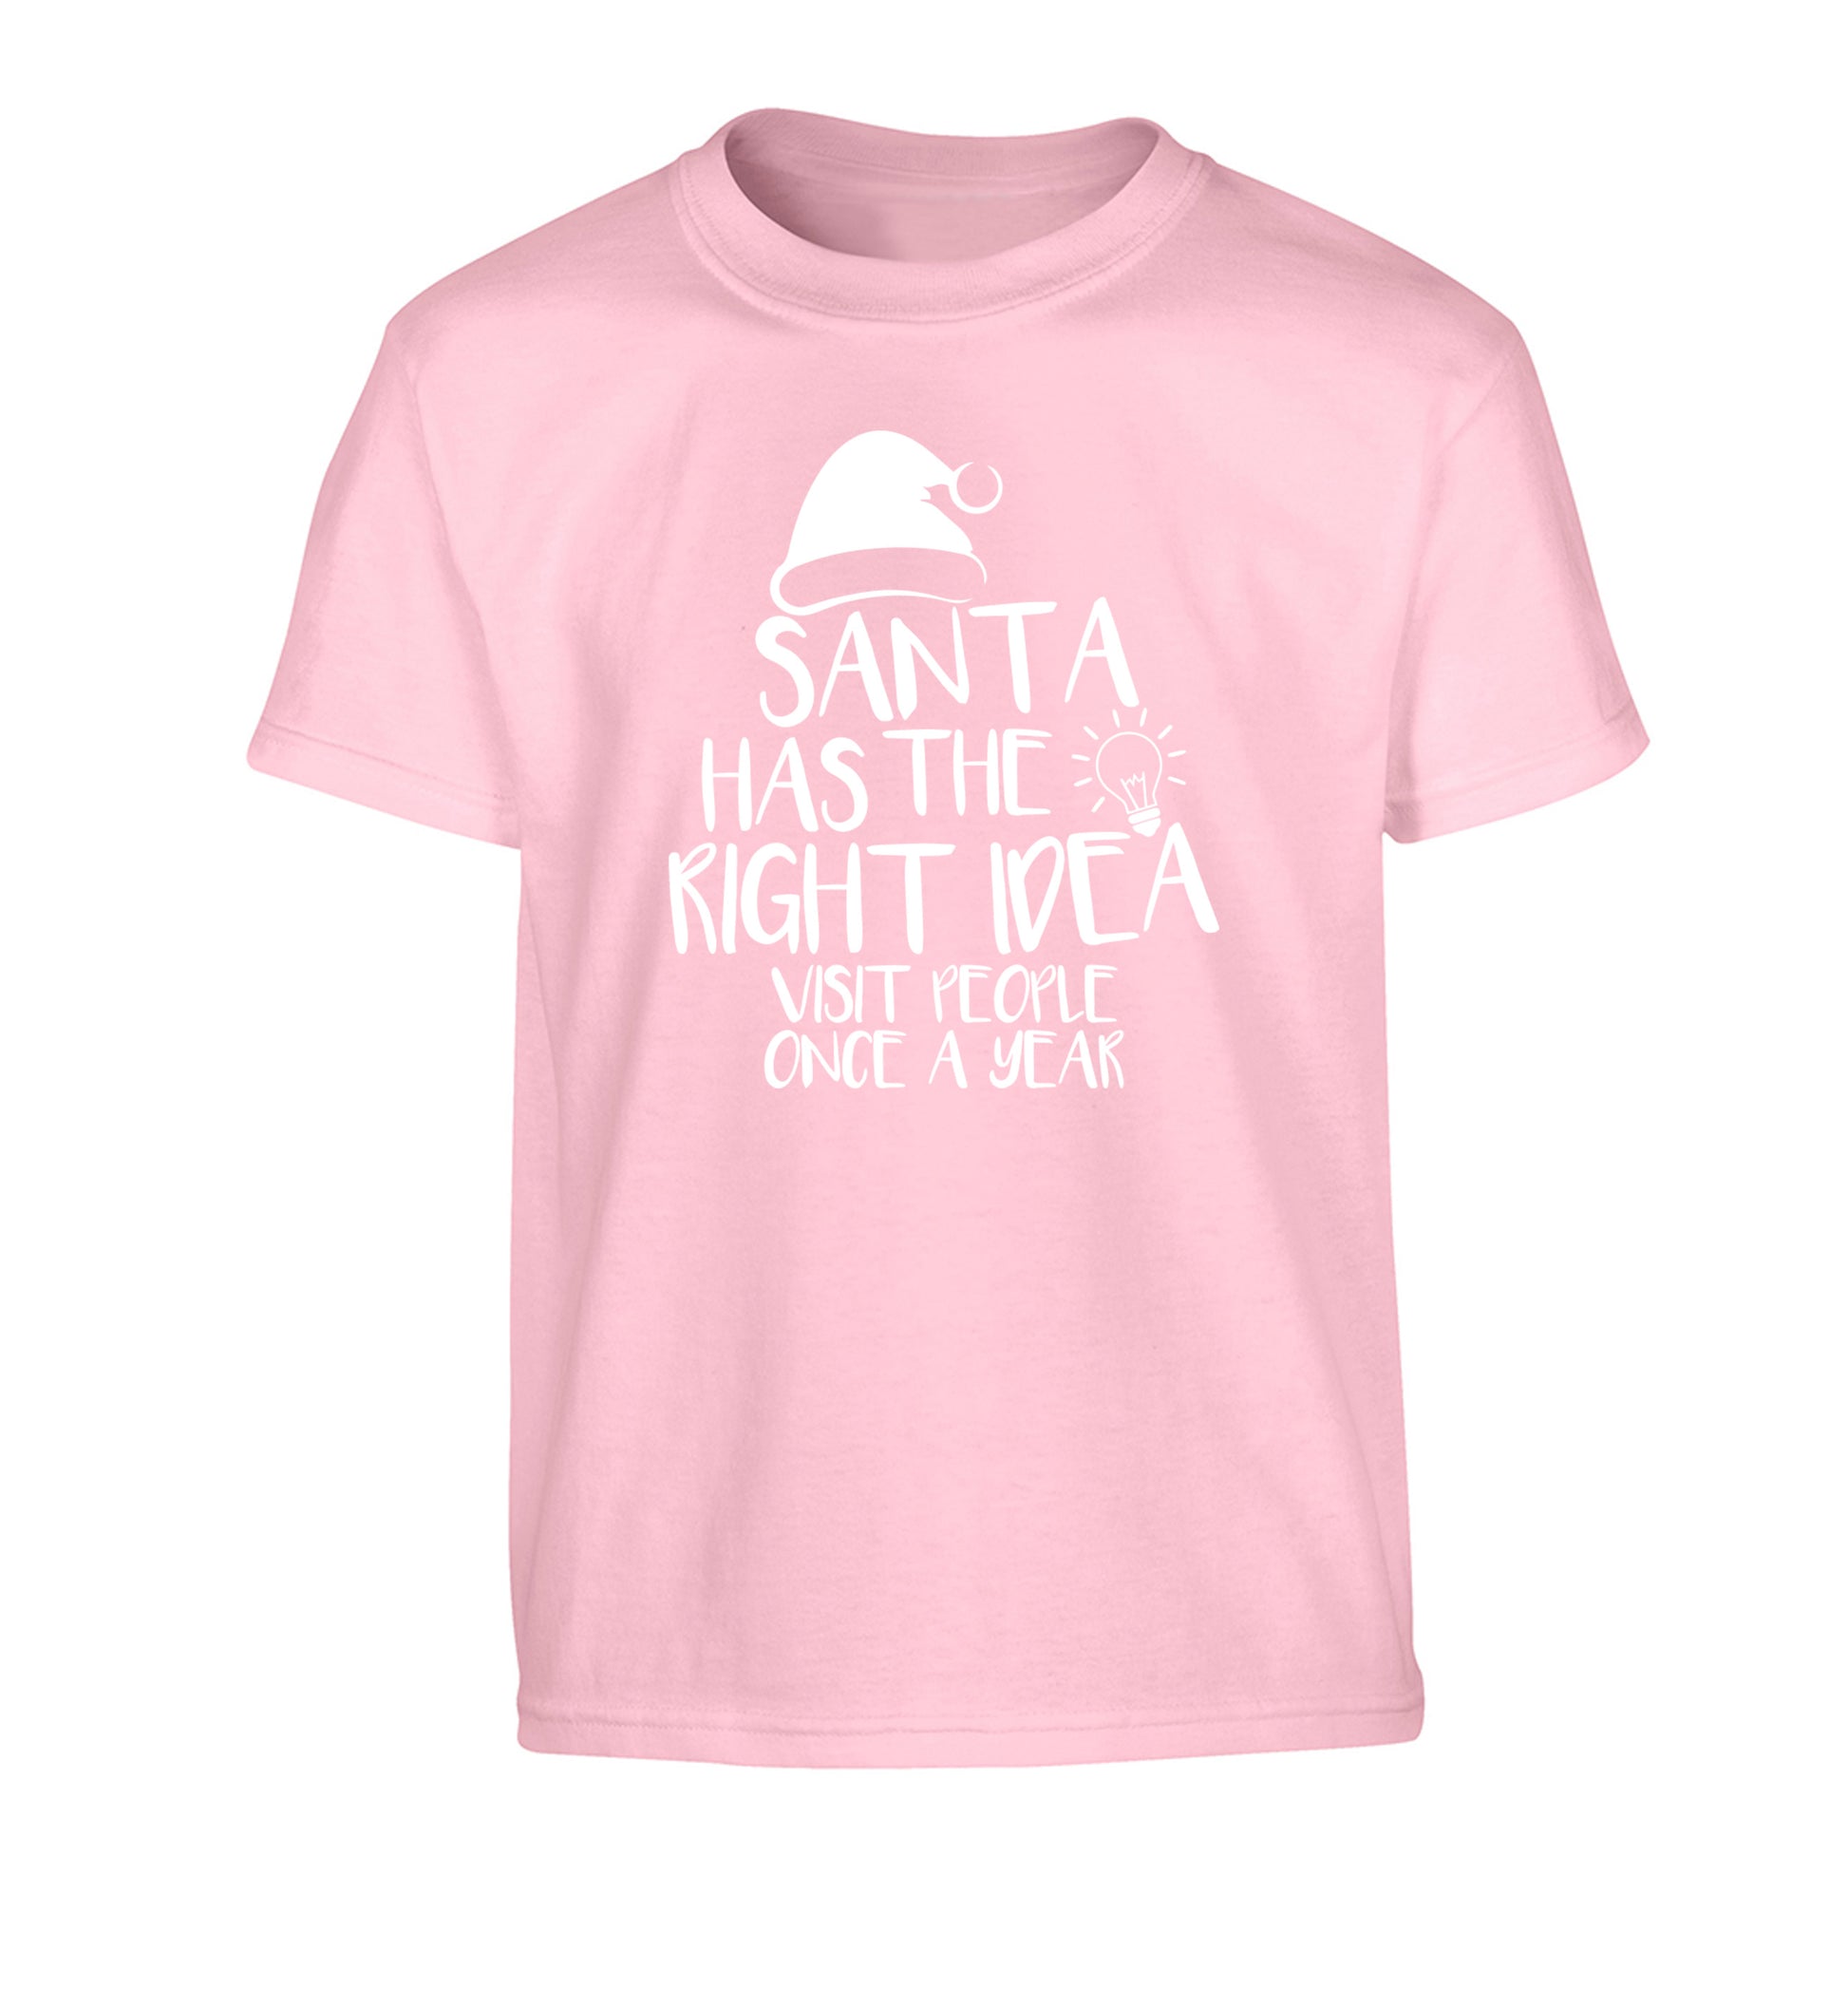 Santa has the right idea visit people once a year Children's light pink Tshirt 12-14 Years